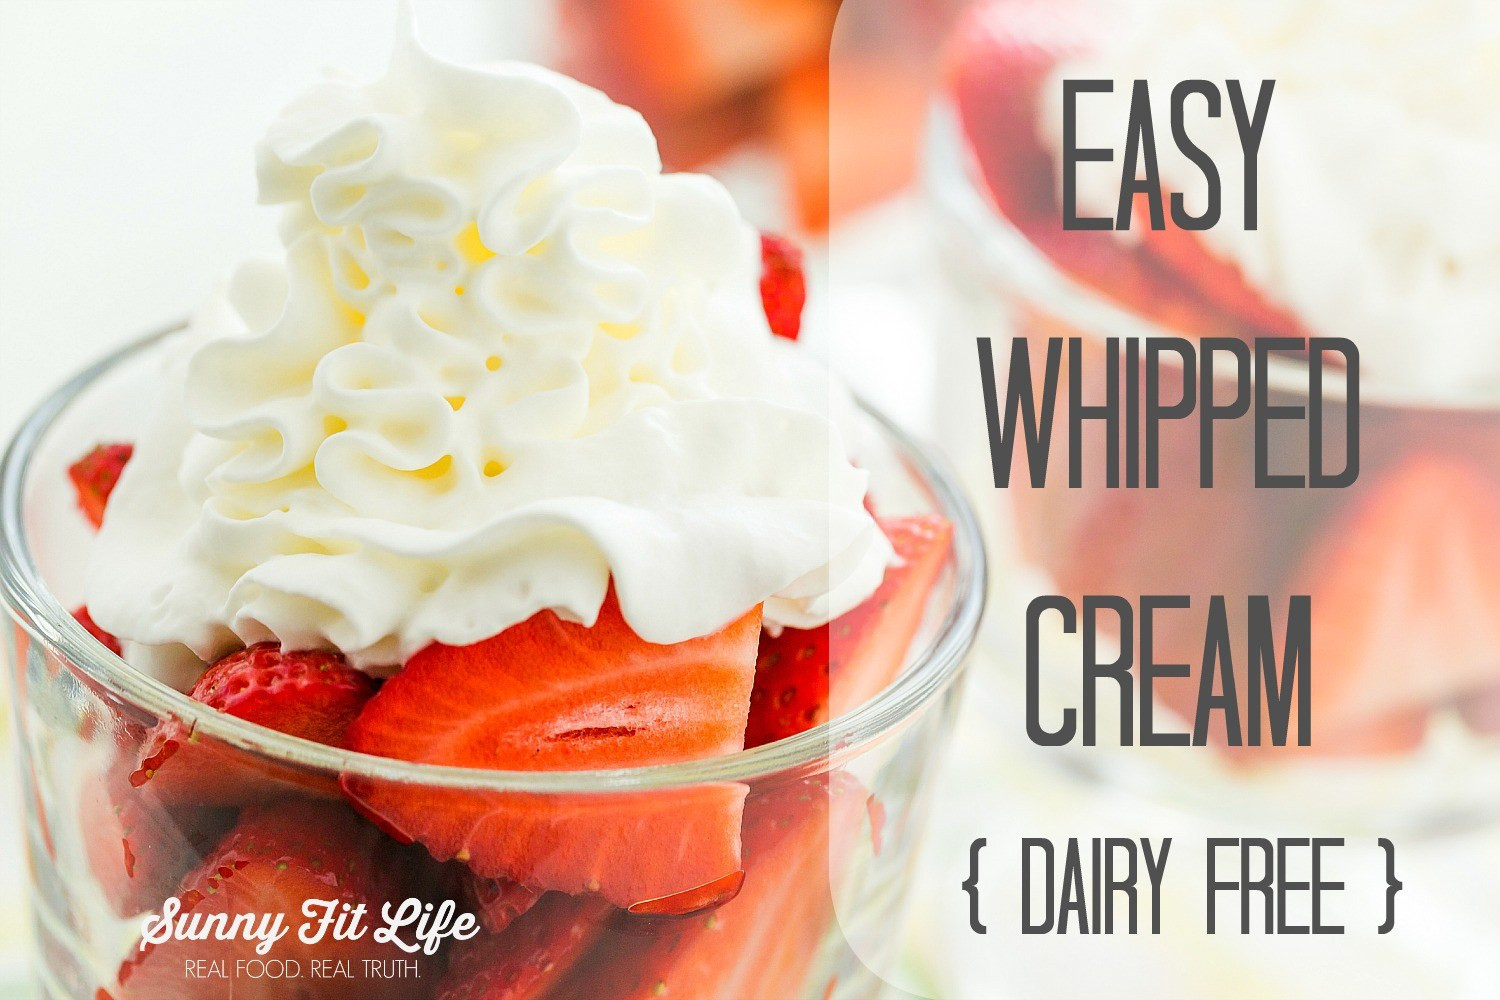 Easy Dairy Free Recipes
 Easy Dairy Free Whipped Cream